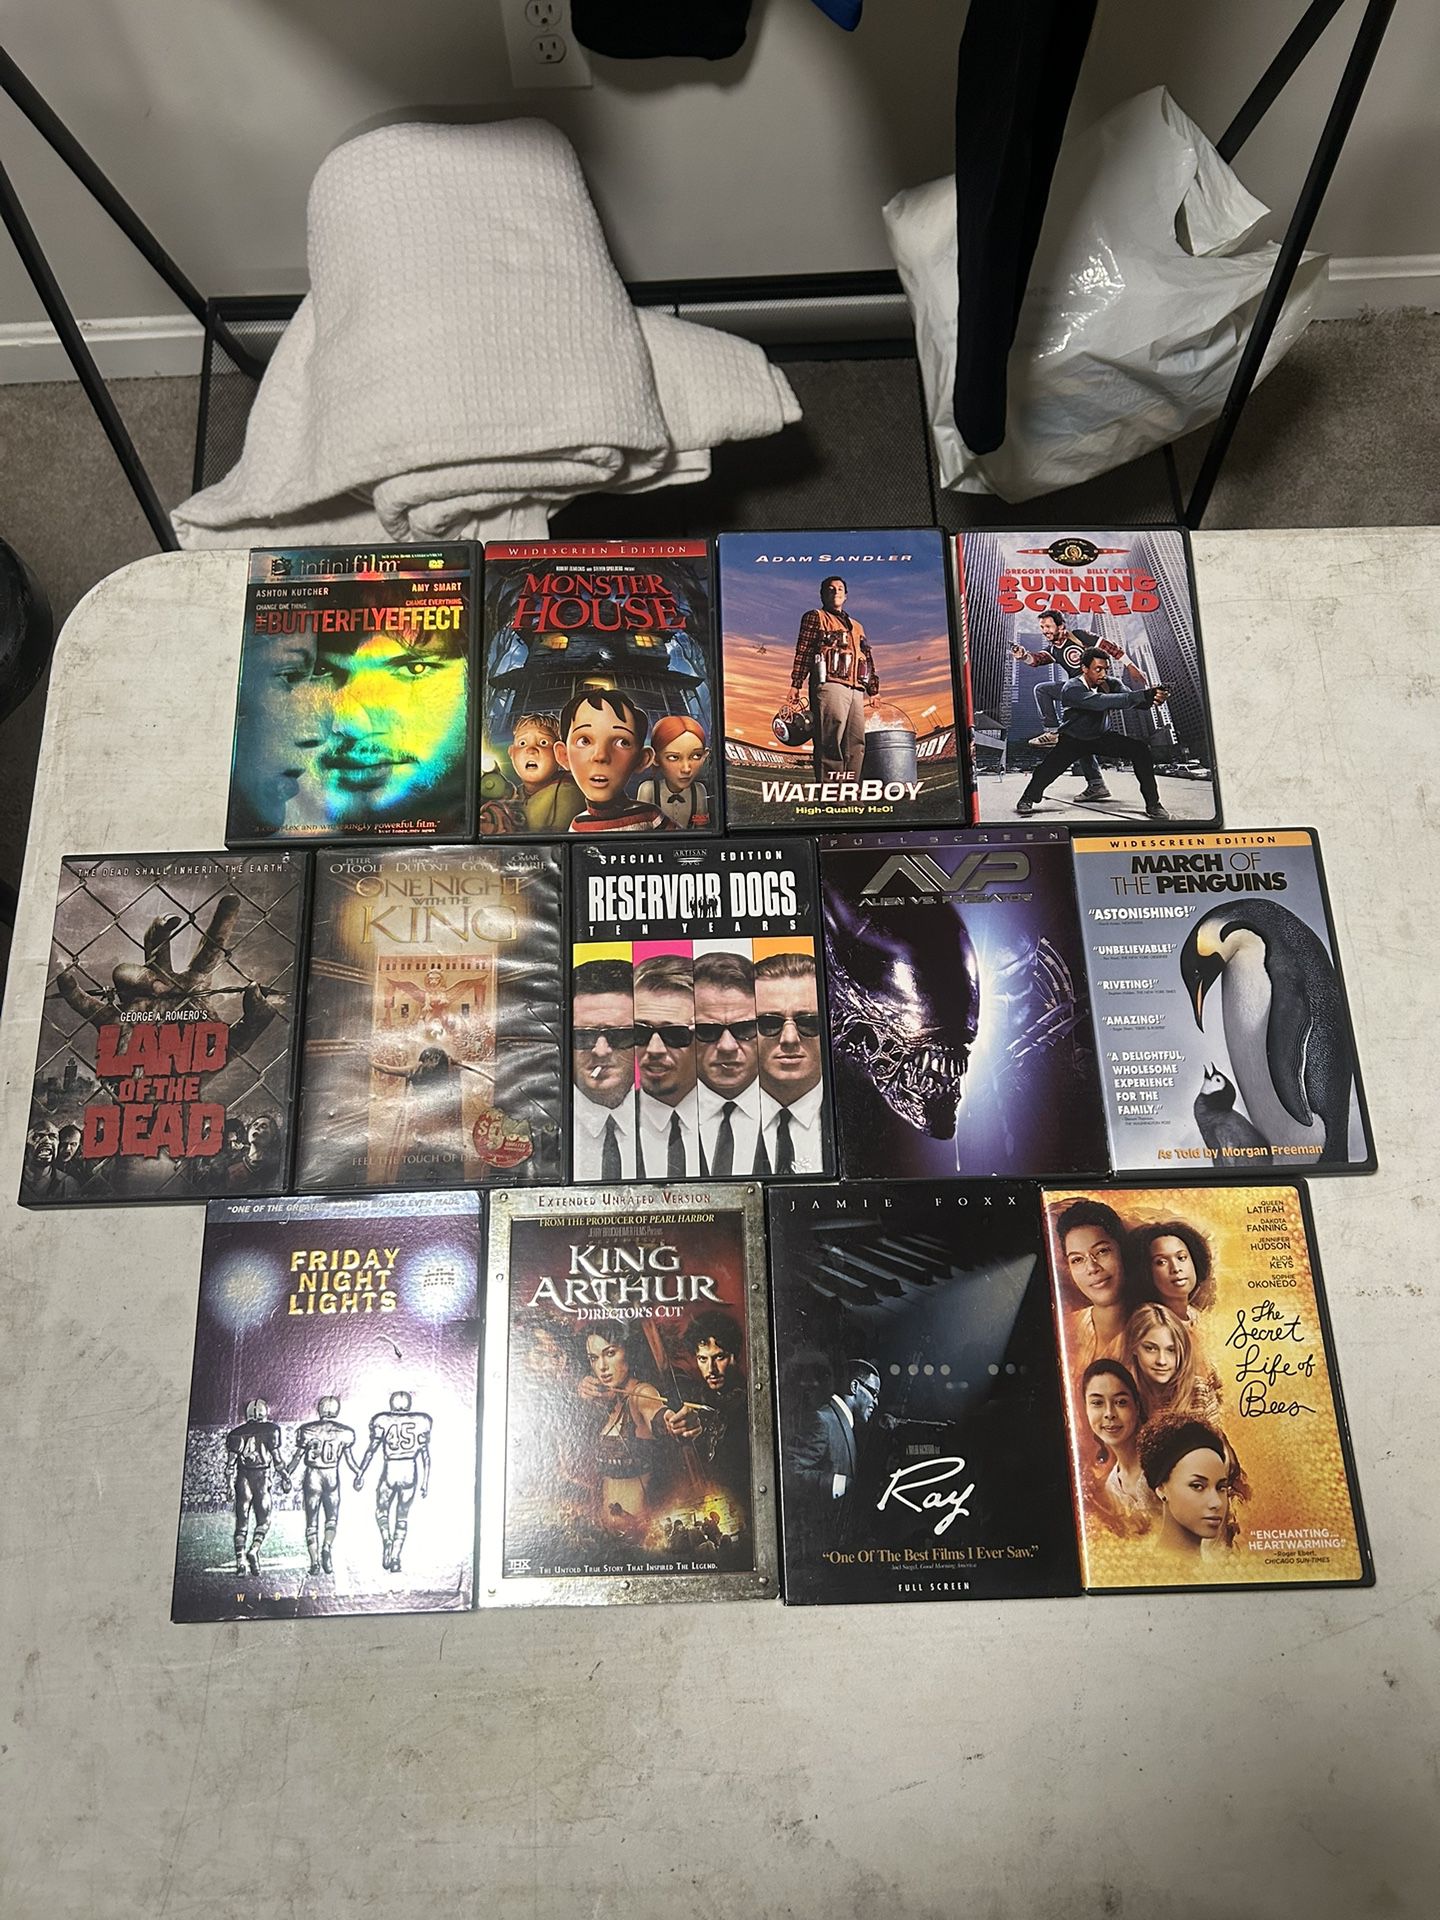 Lot of DVD Movies 